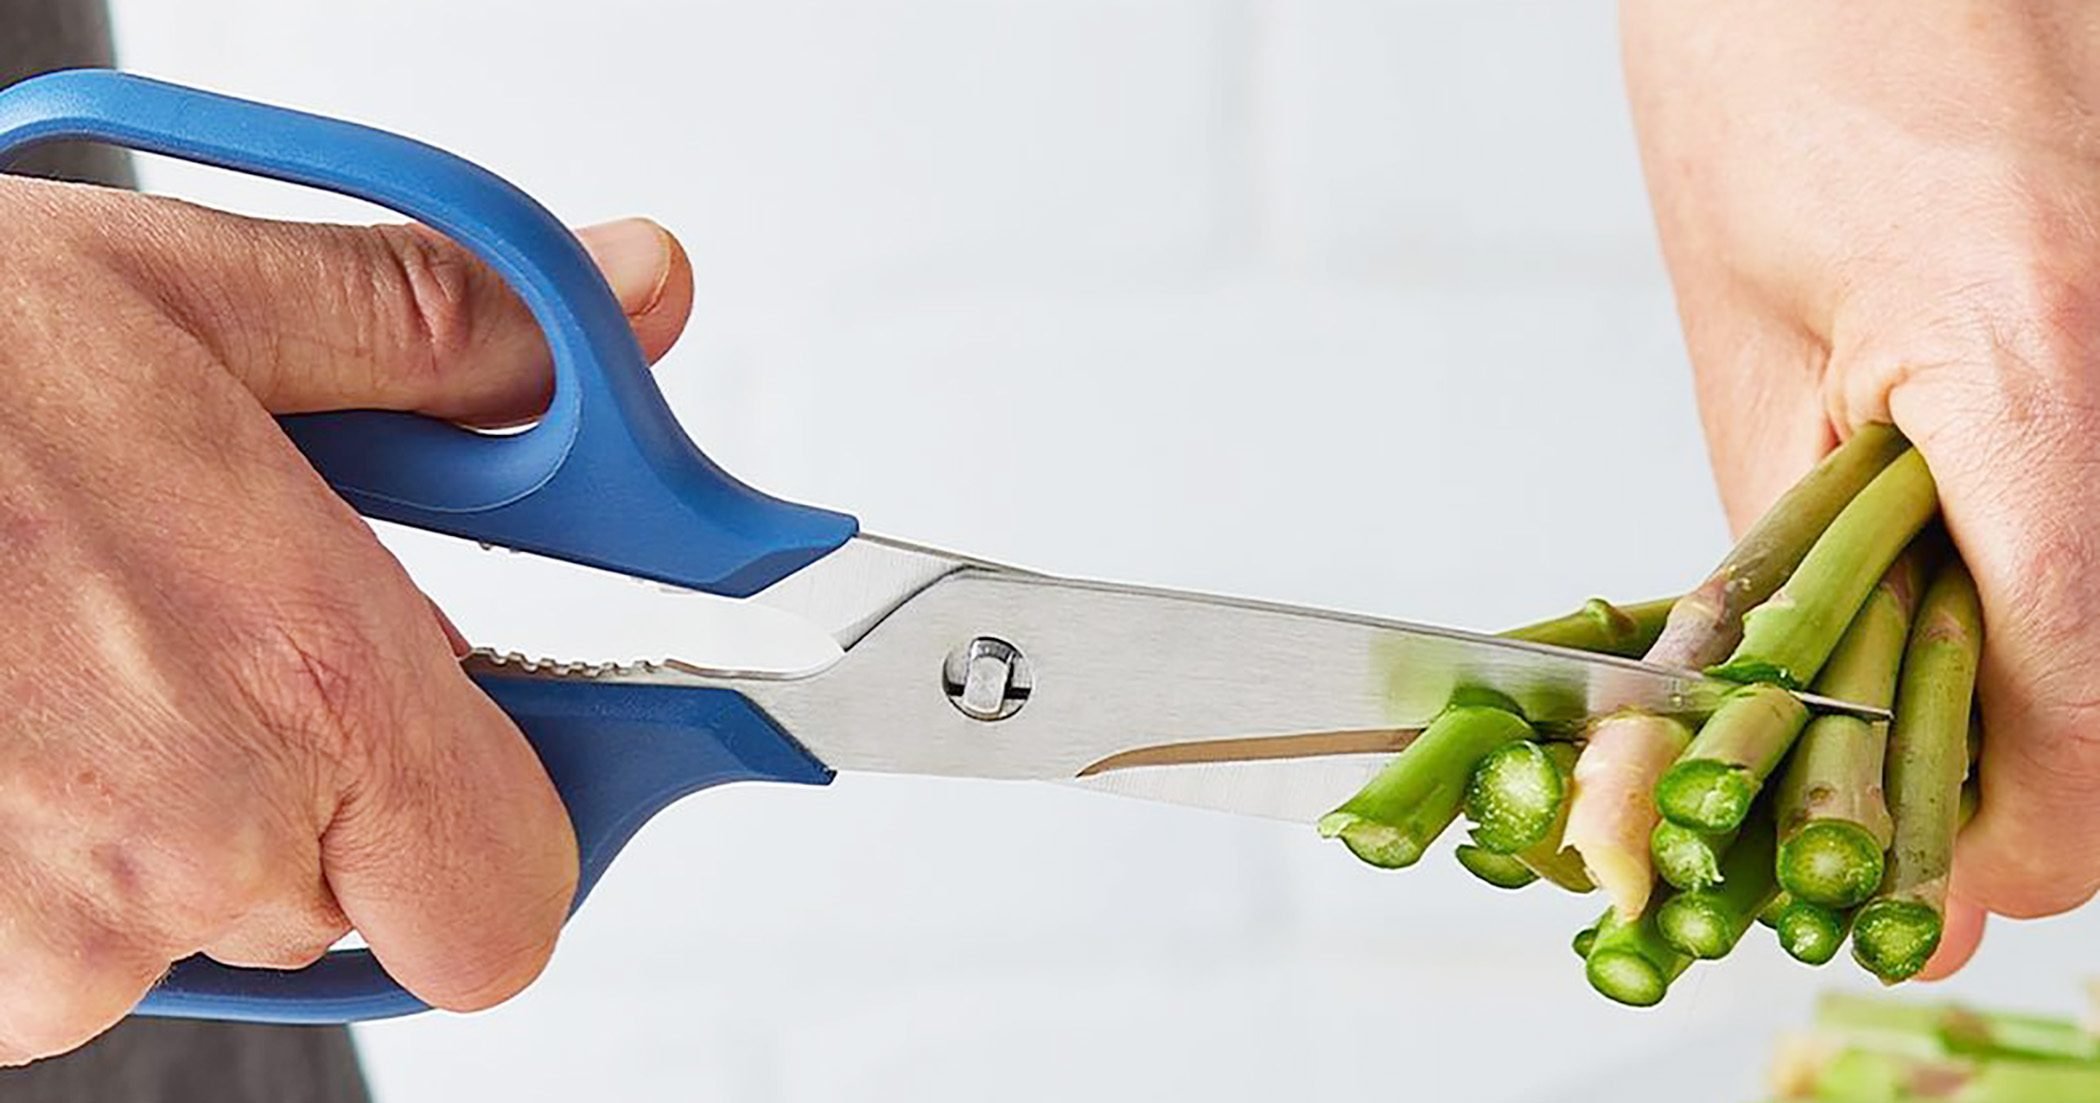 Misen Kitchen Shears Just Launched & They're Incredibly Strong